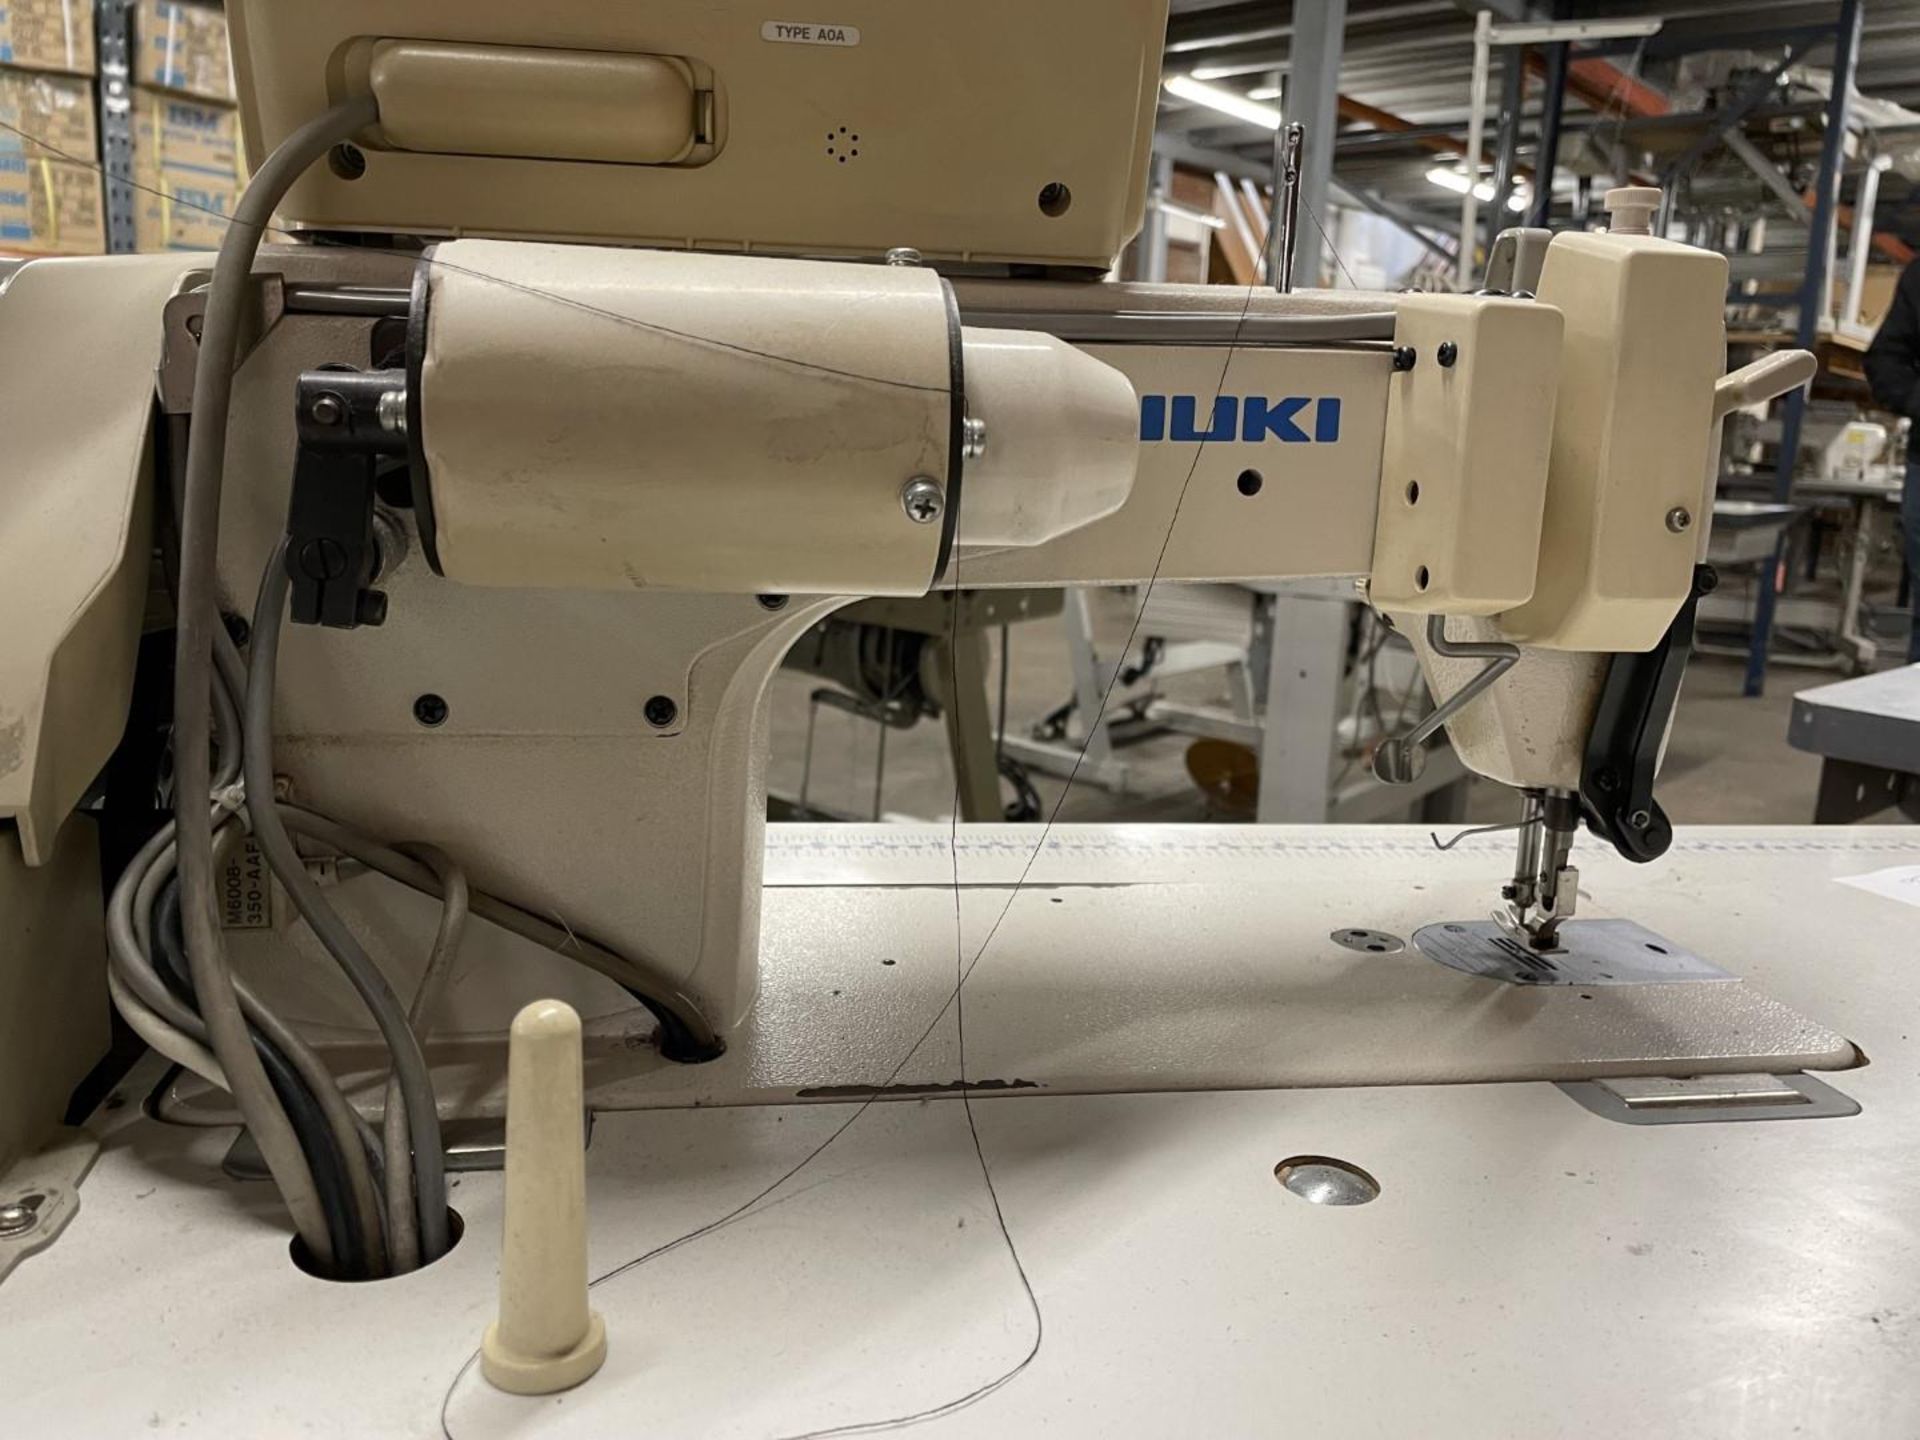 1 x Juki DDL850 Single Needle Automatic Lockstitch Industrial Sewing Machine With Table - Image 9 of 16